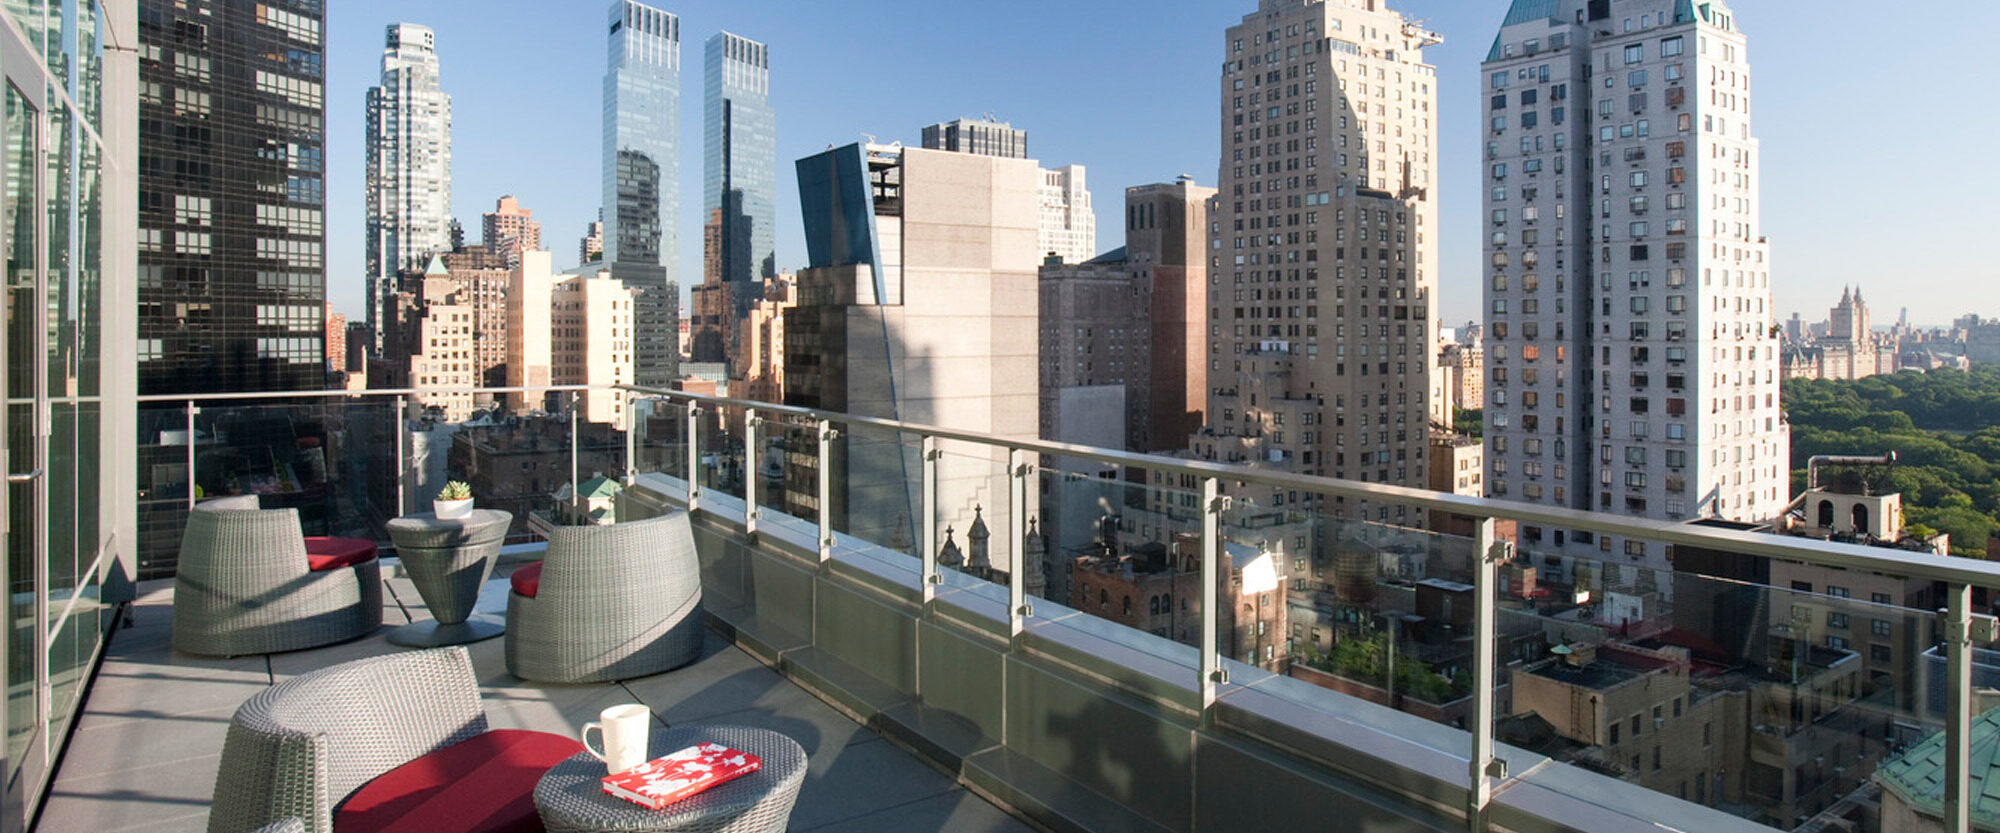 Rooftop terrace with woven outdoor furniture set against a backdrop of New York City's skyline, showcasing modern urban outdoor design integrating cozy seating areas with metropolitan views.